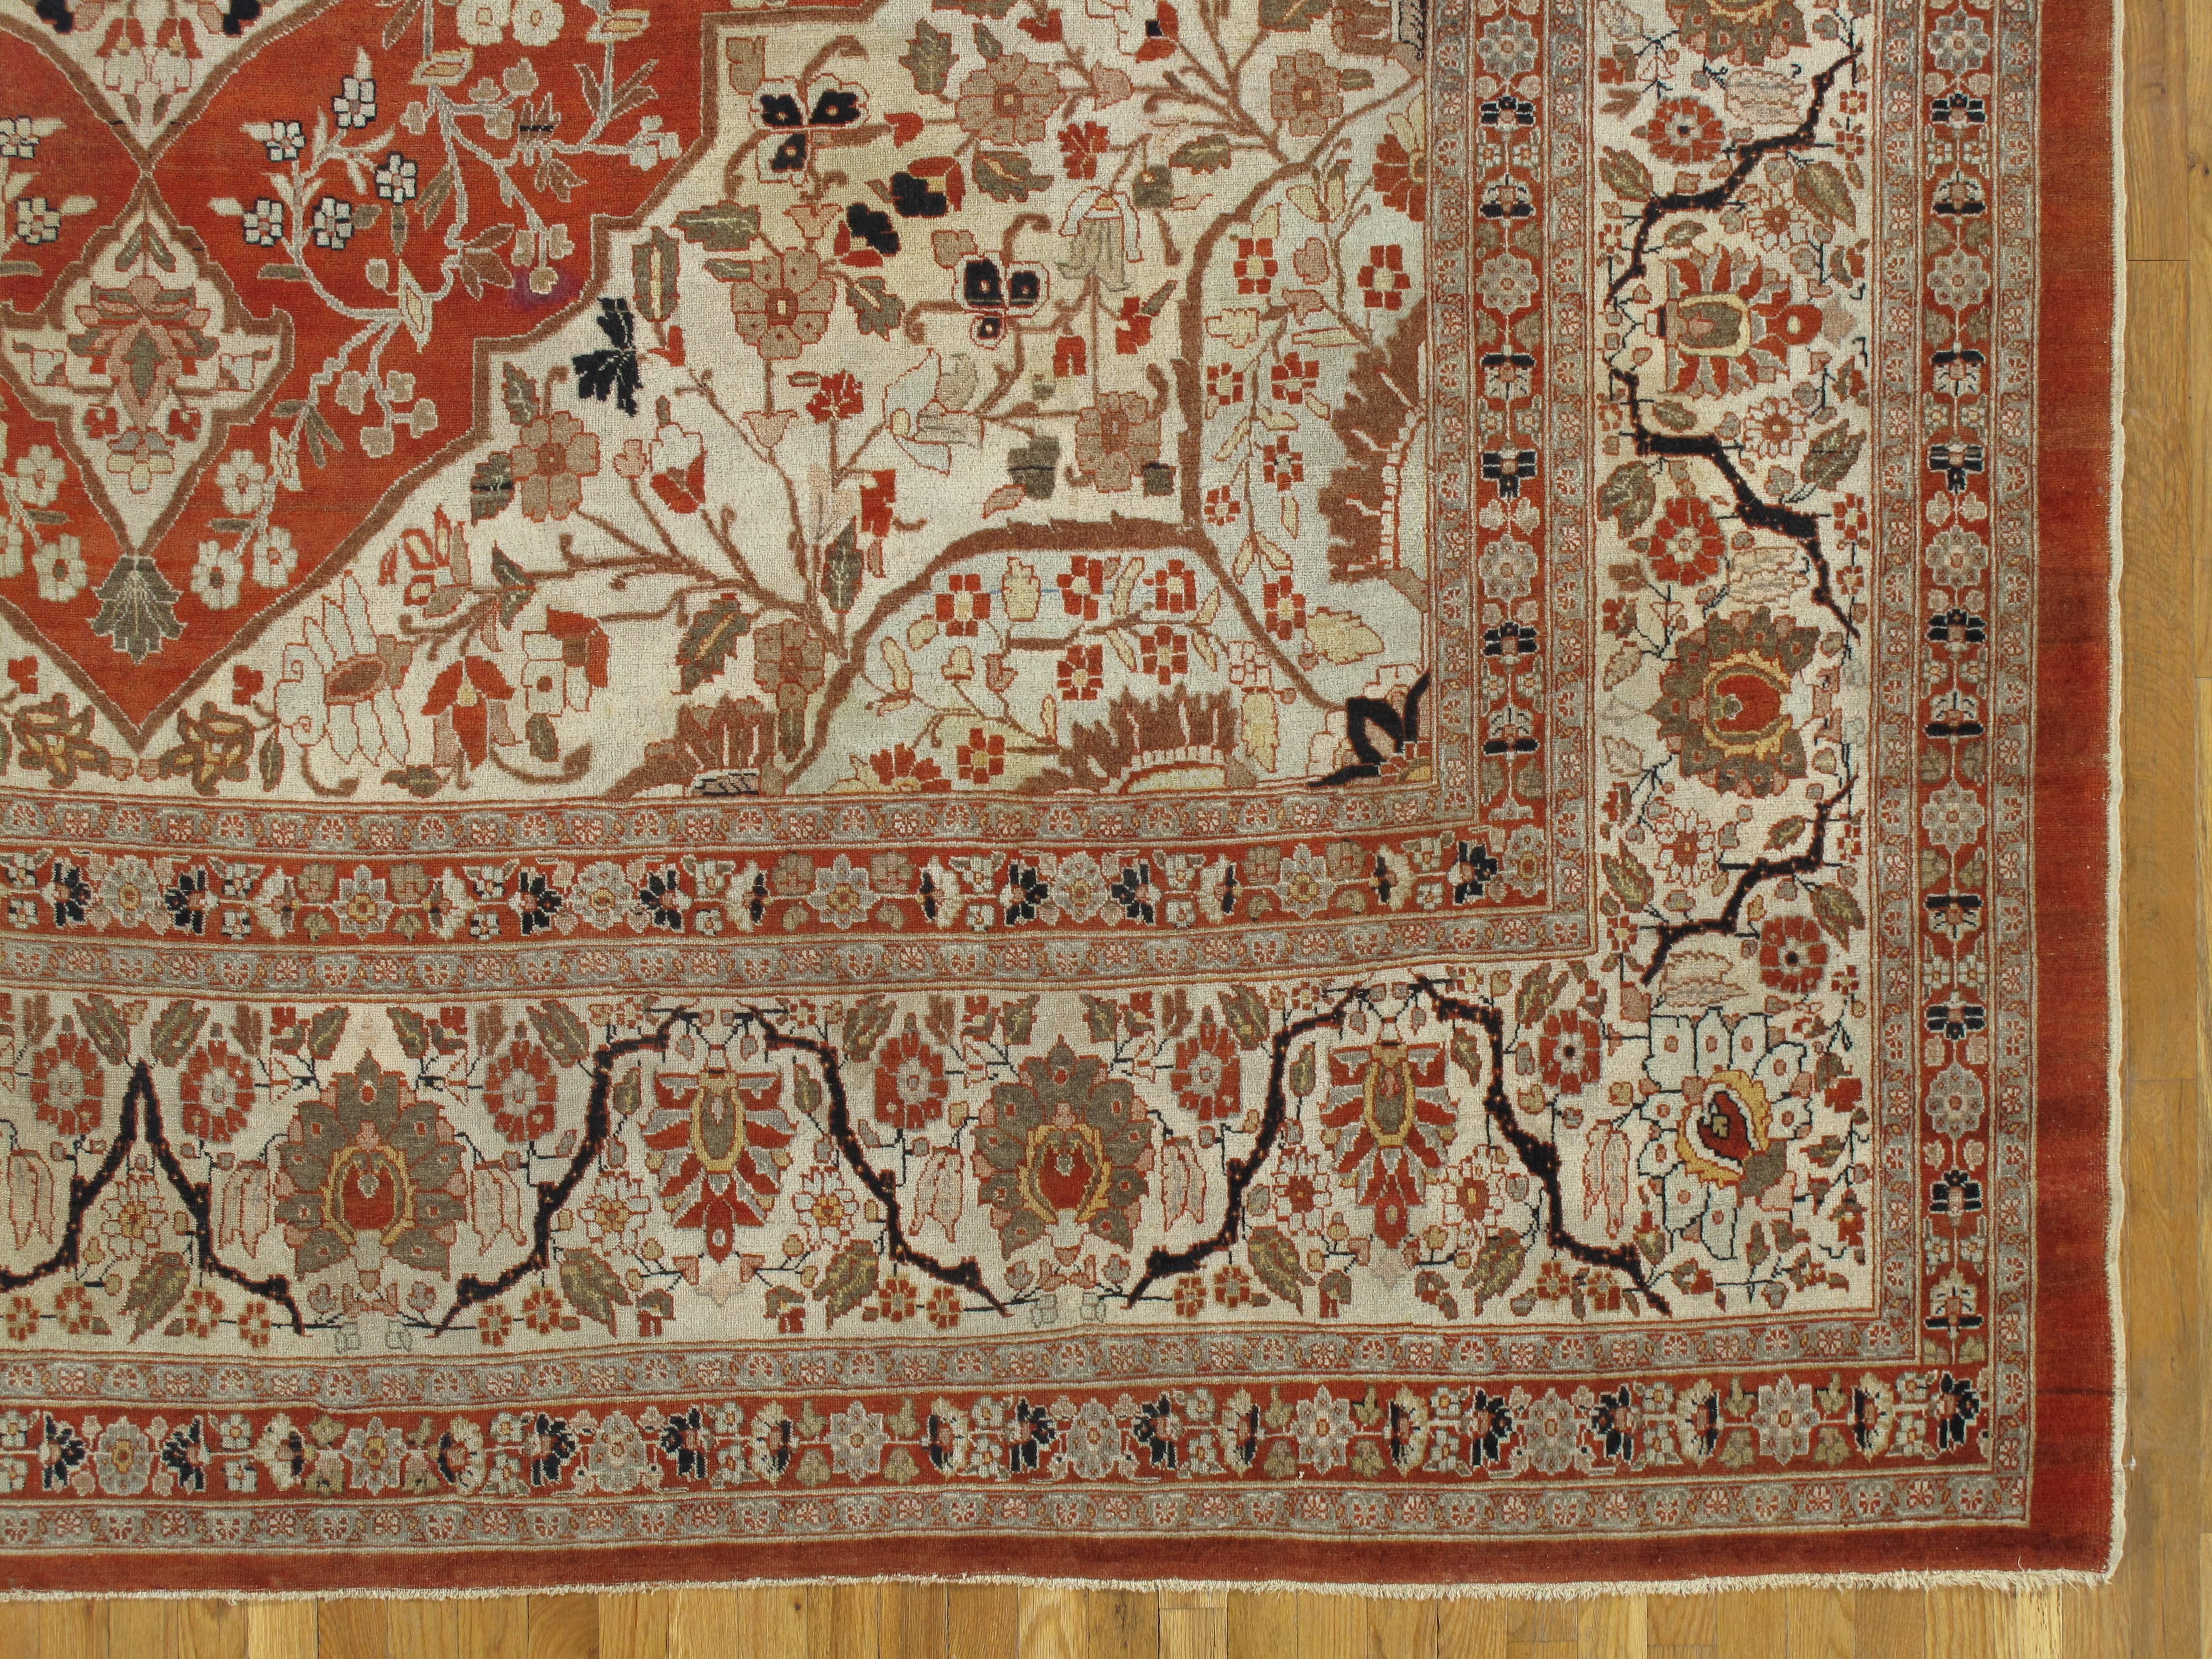 19th Century Antique Tabriz Carpet, Handmade Persian Rug in Floral Soft, Beige and Taupe